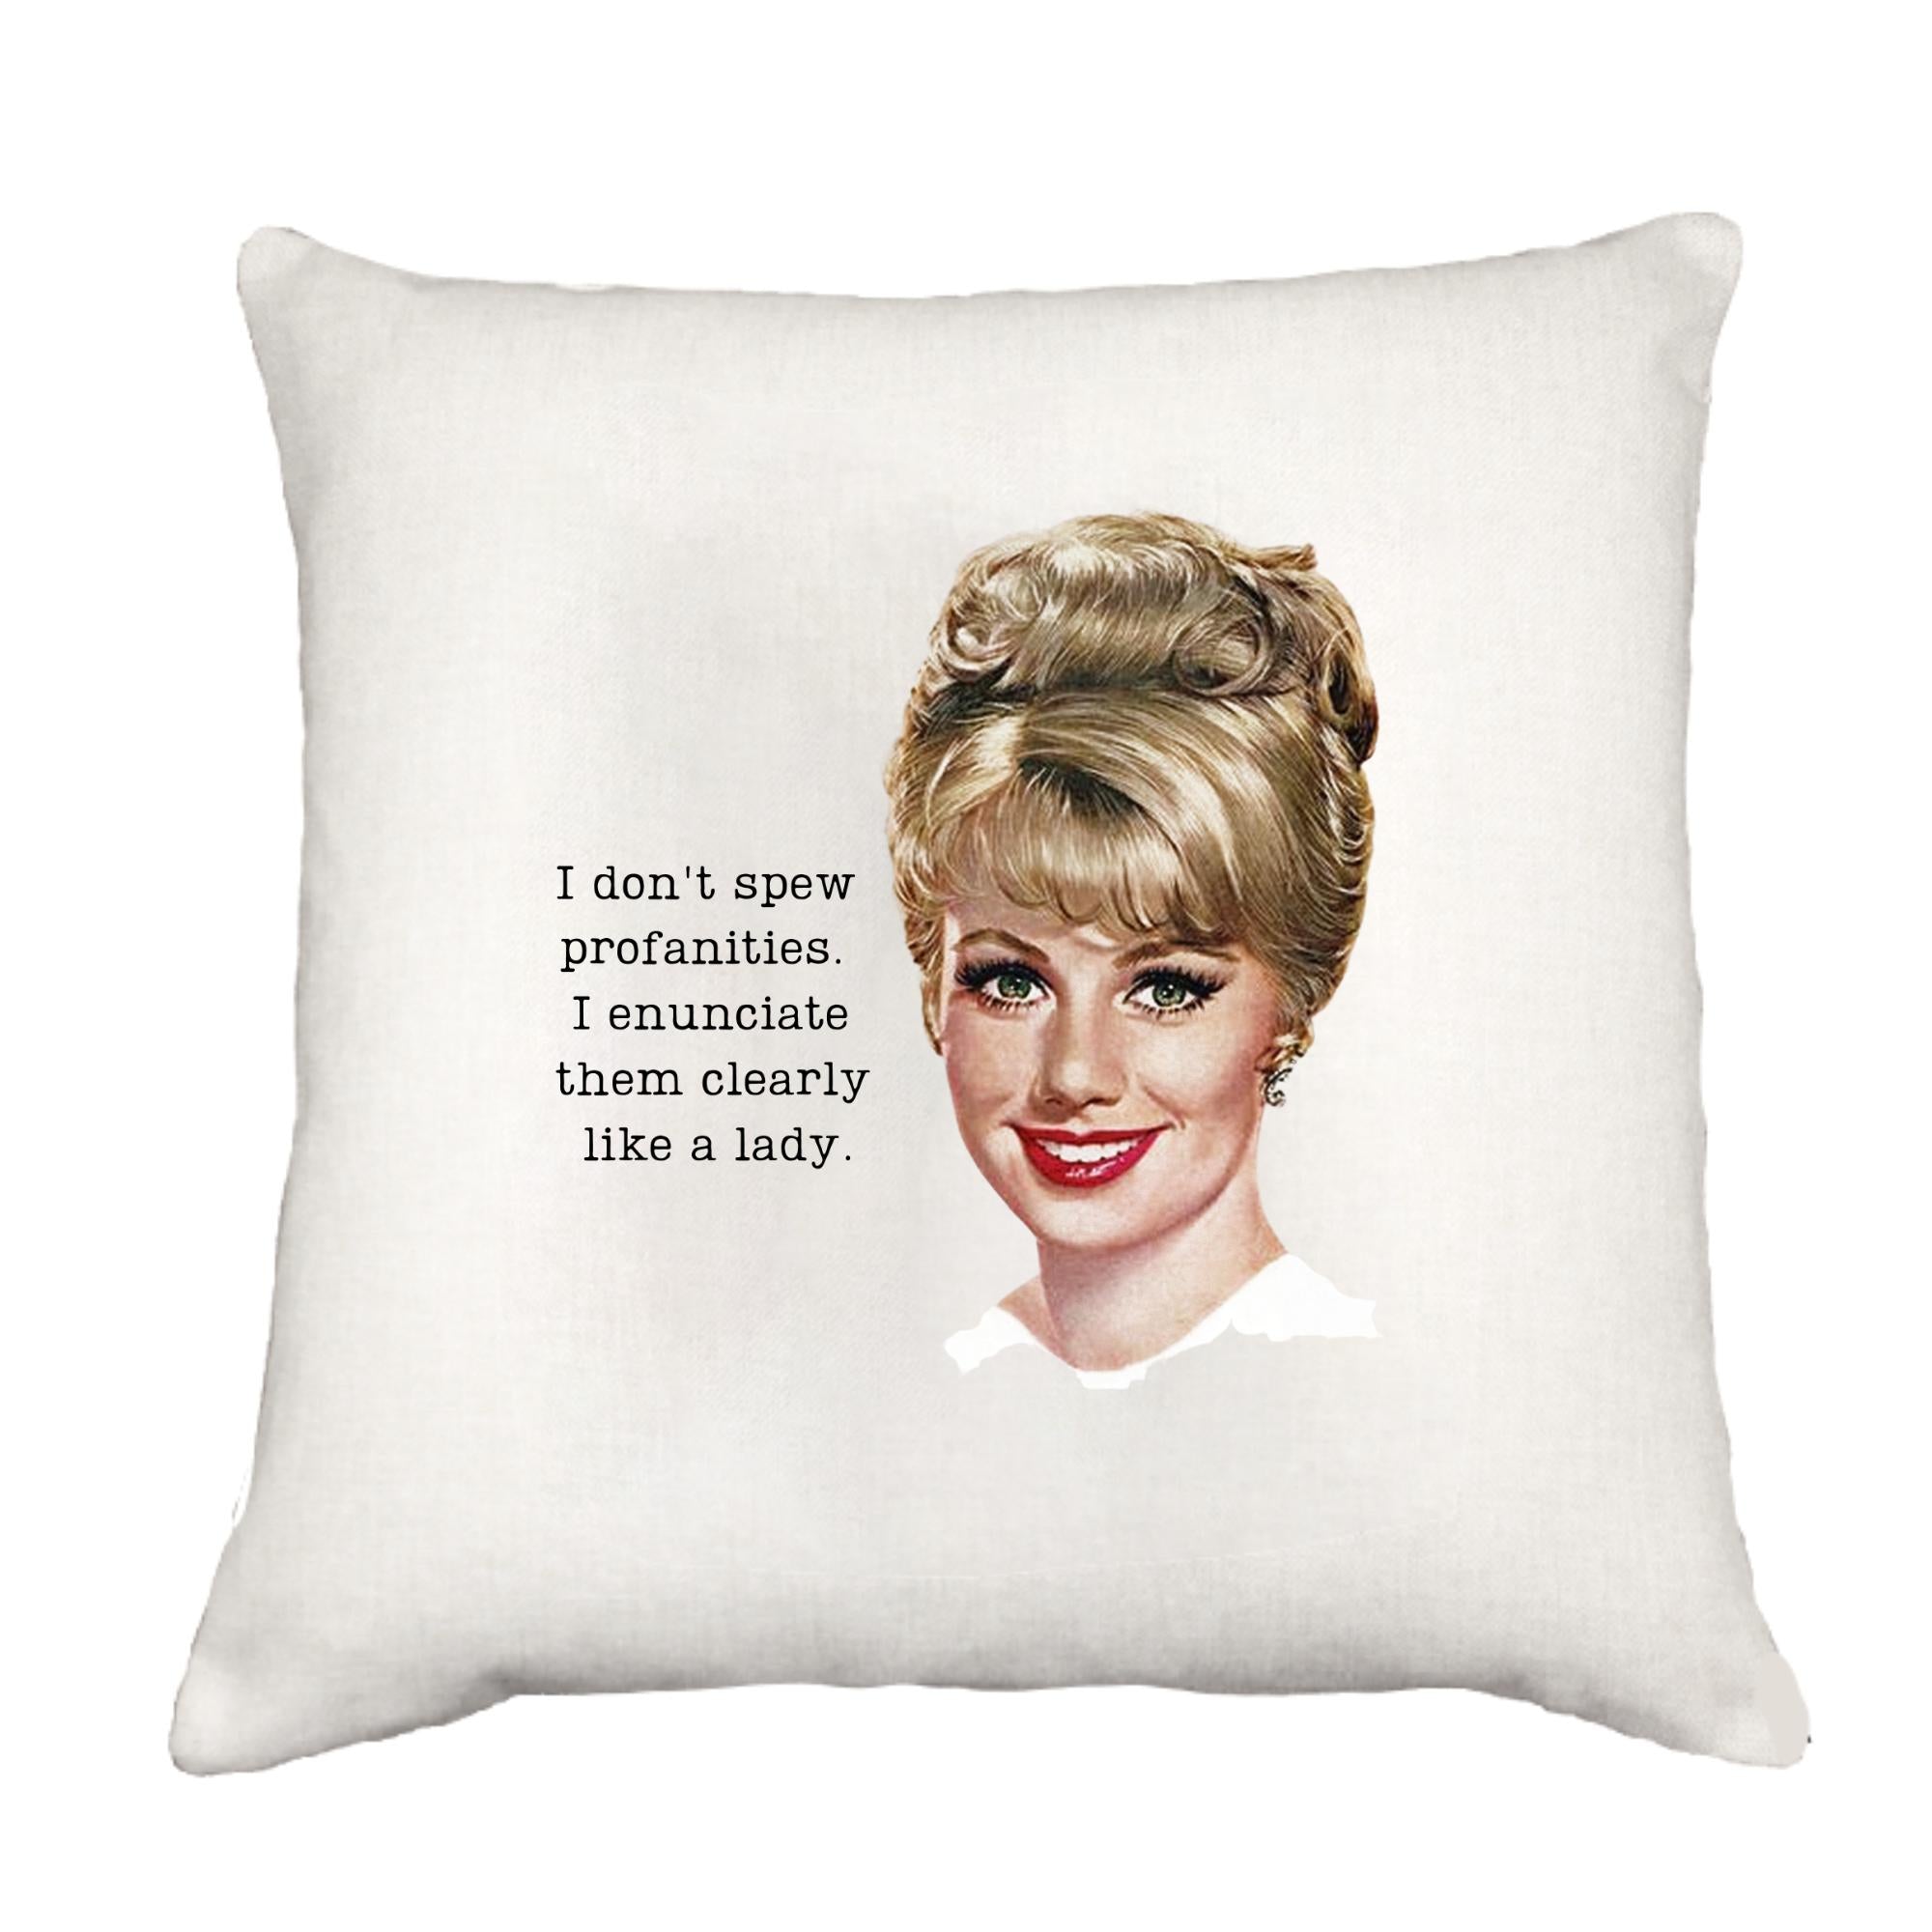 Like A Lady Down Pillow